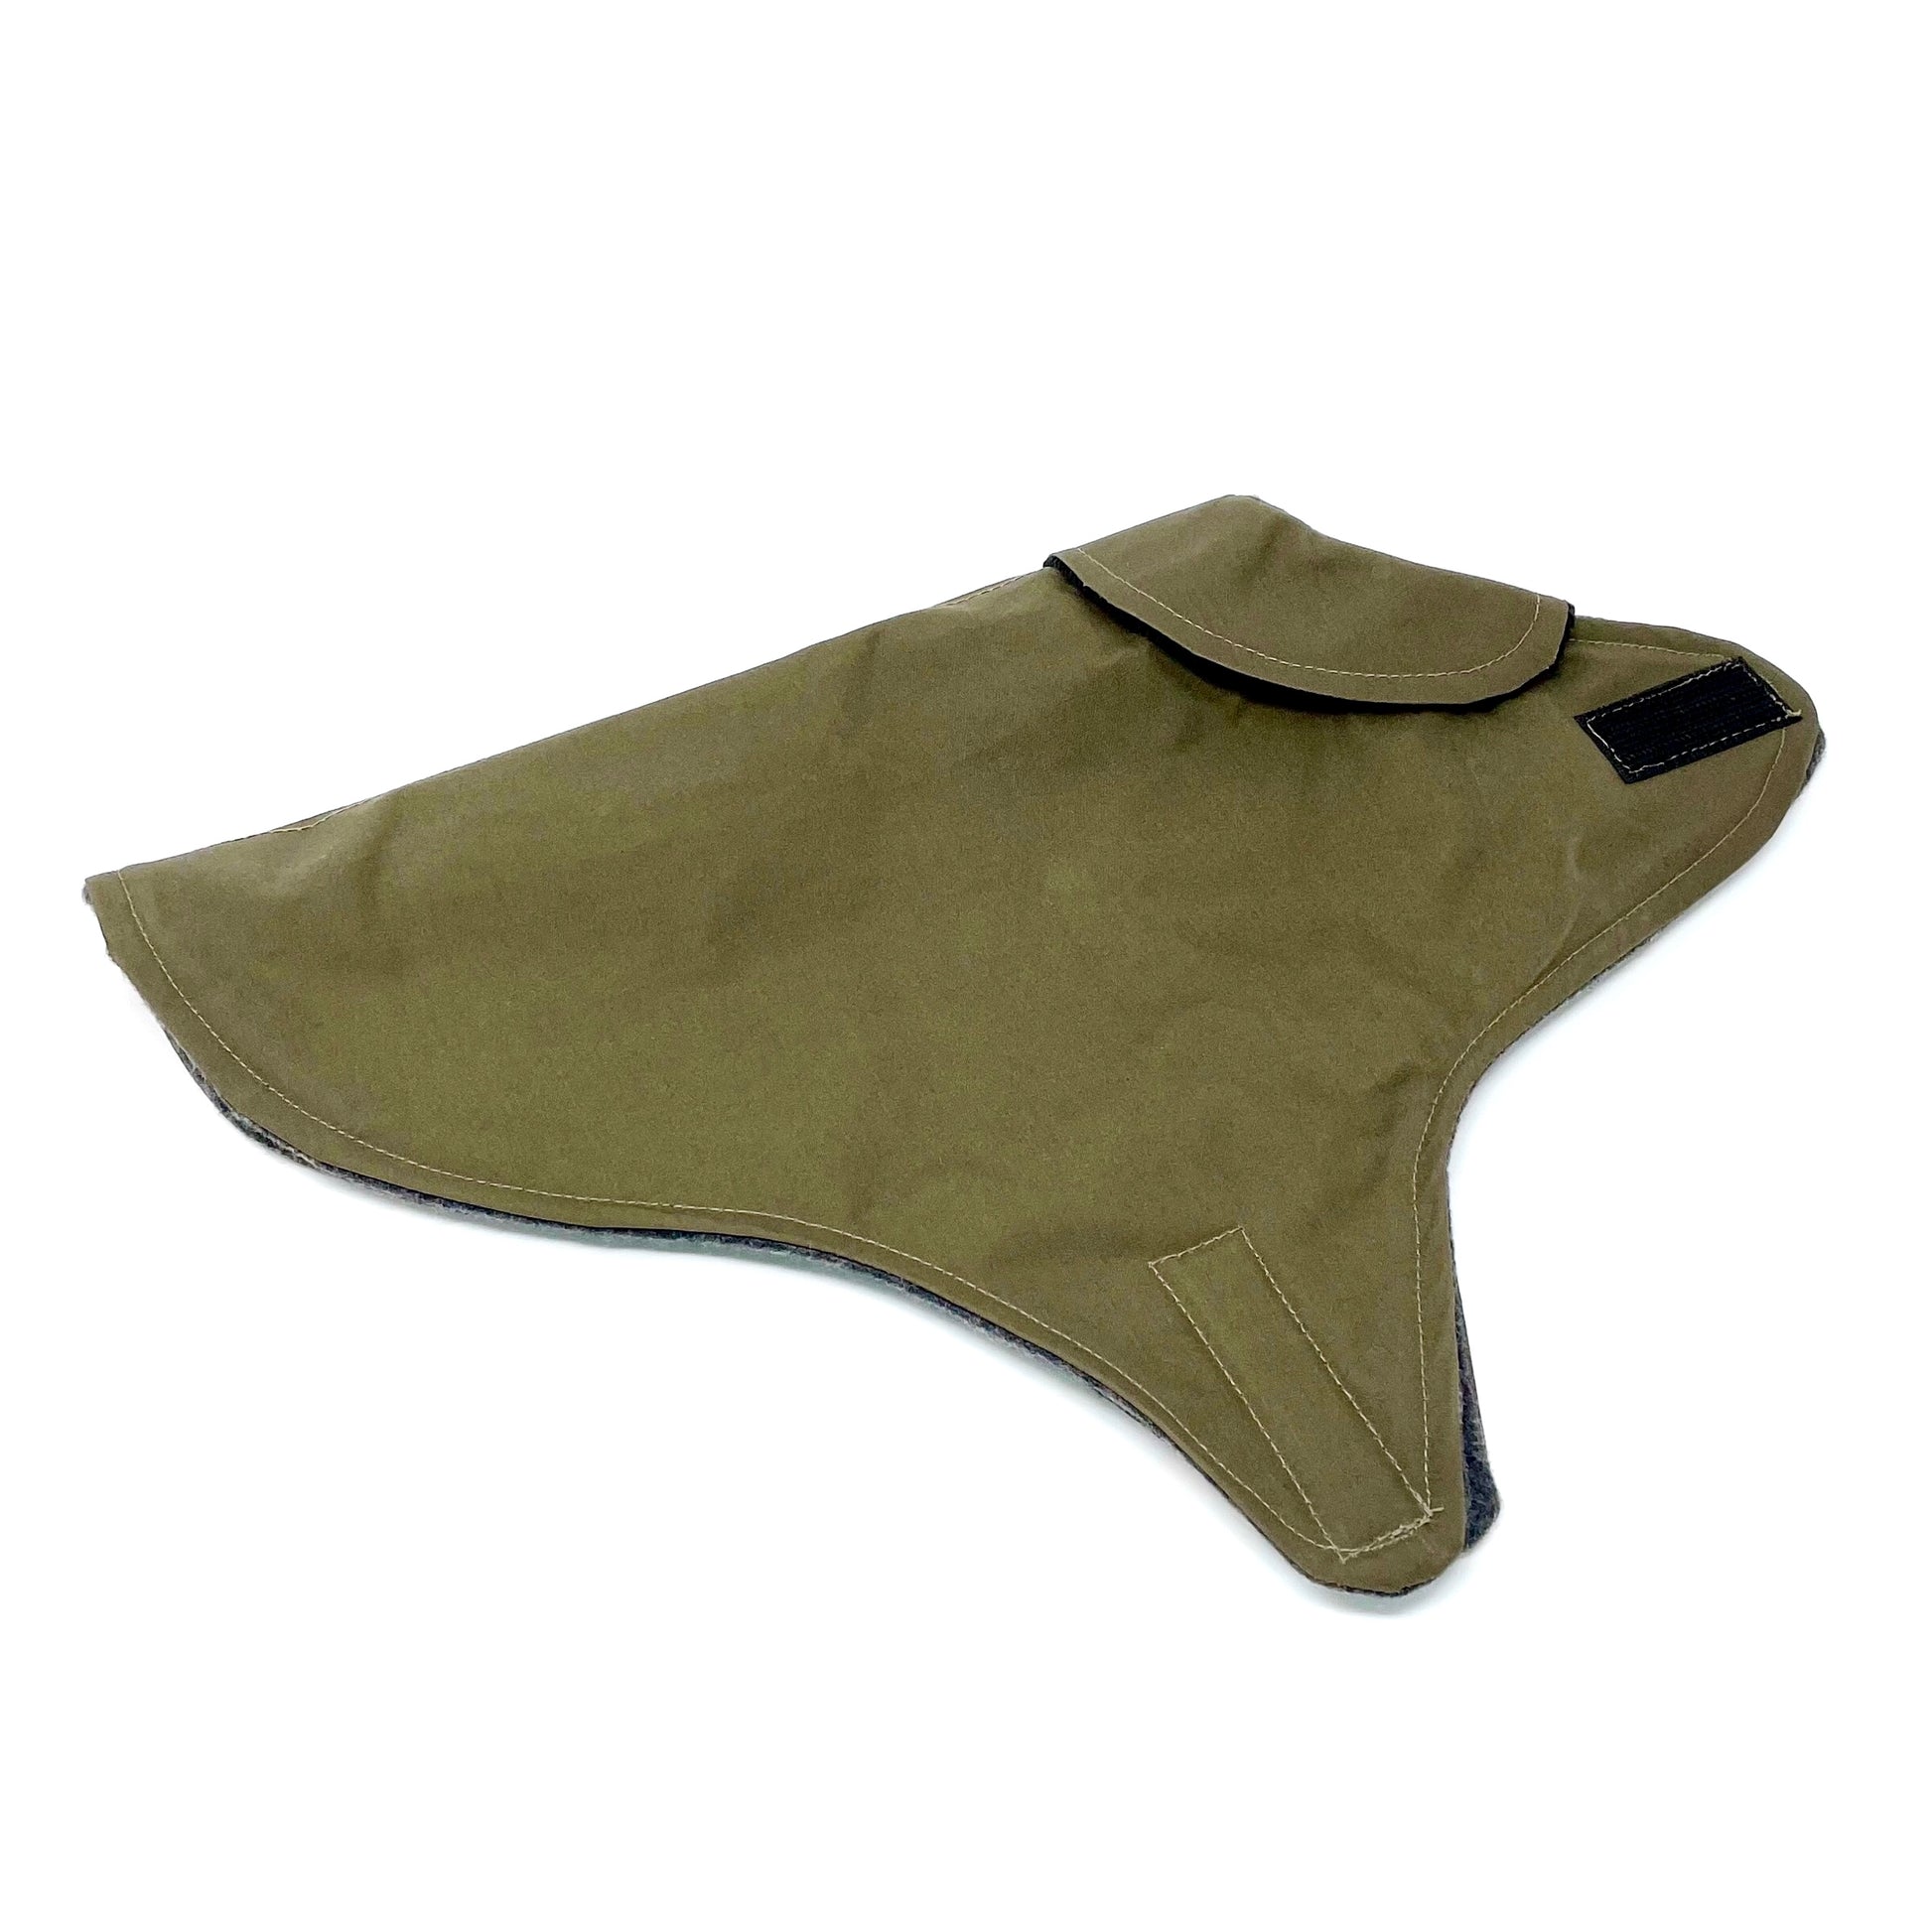 Khaki wax cotton dog coat with collar, folded in half and laid flat on a white background.